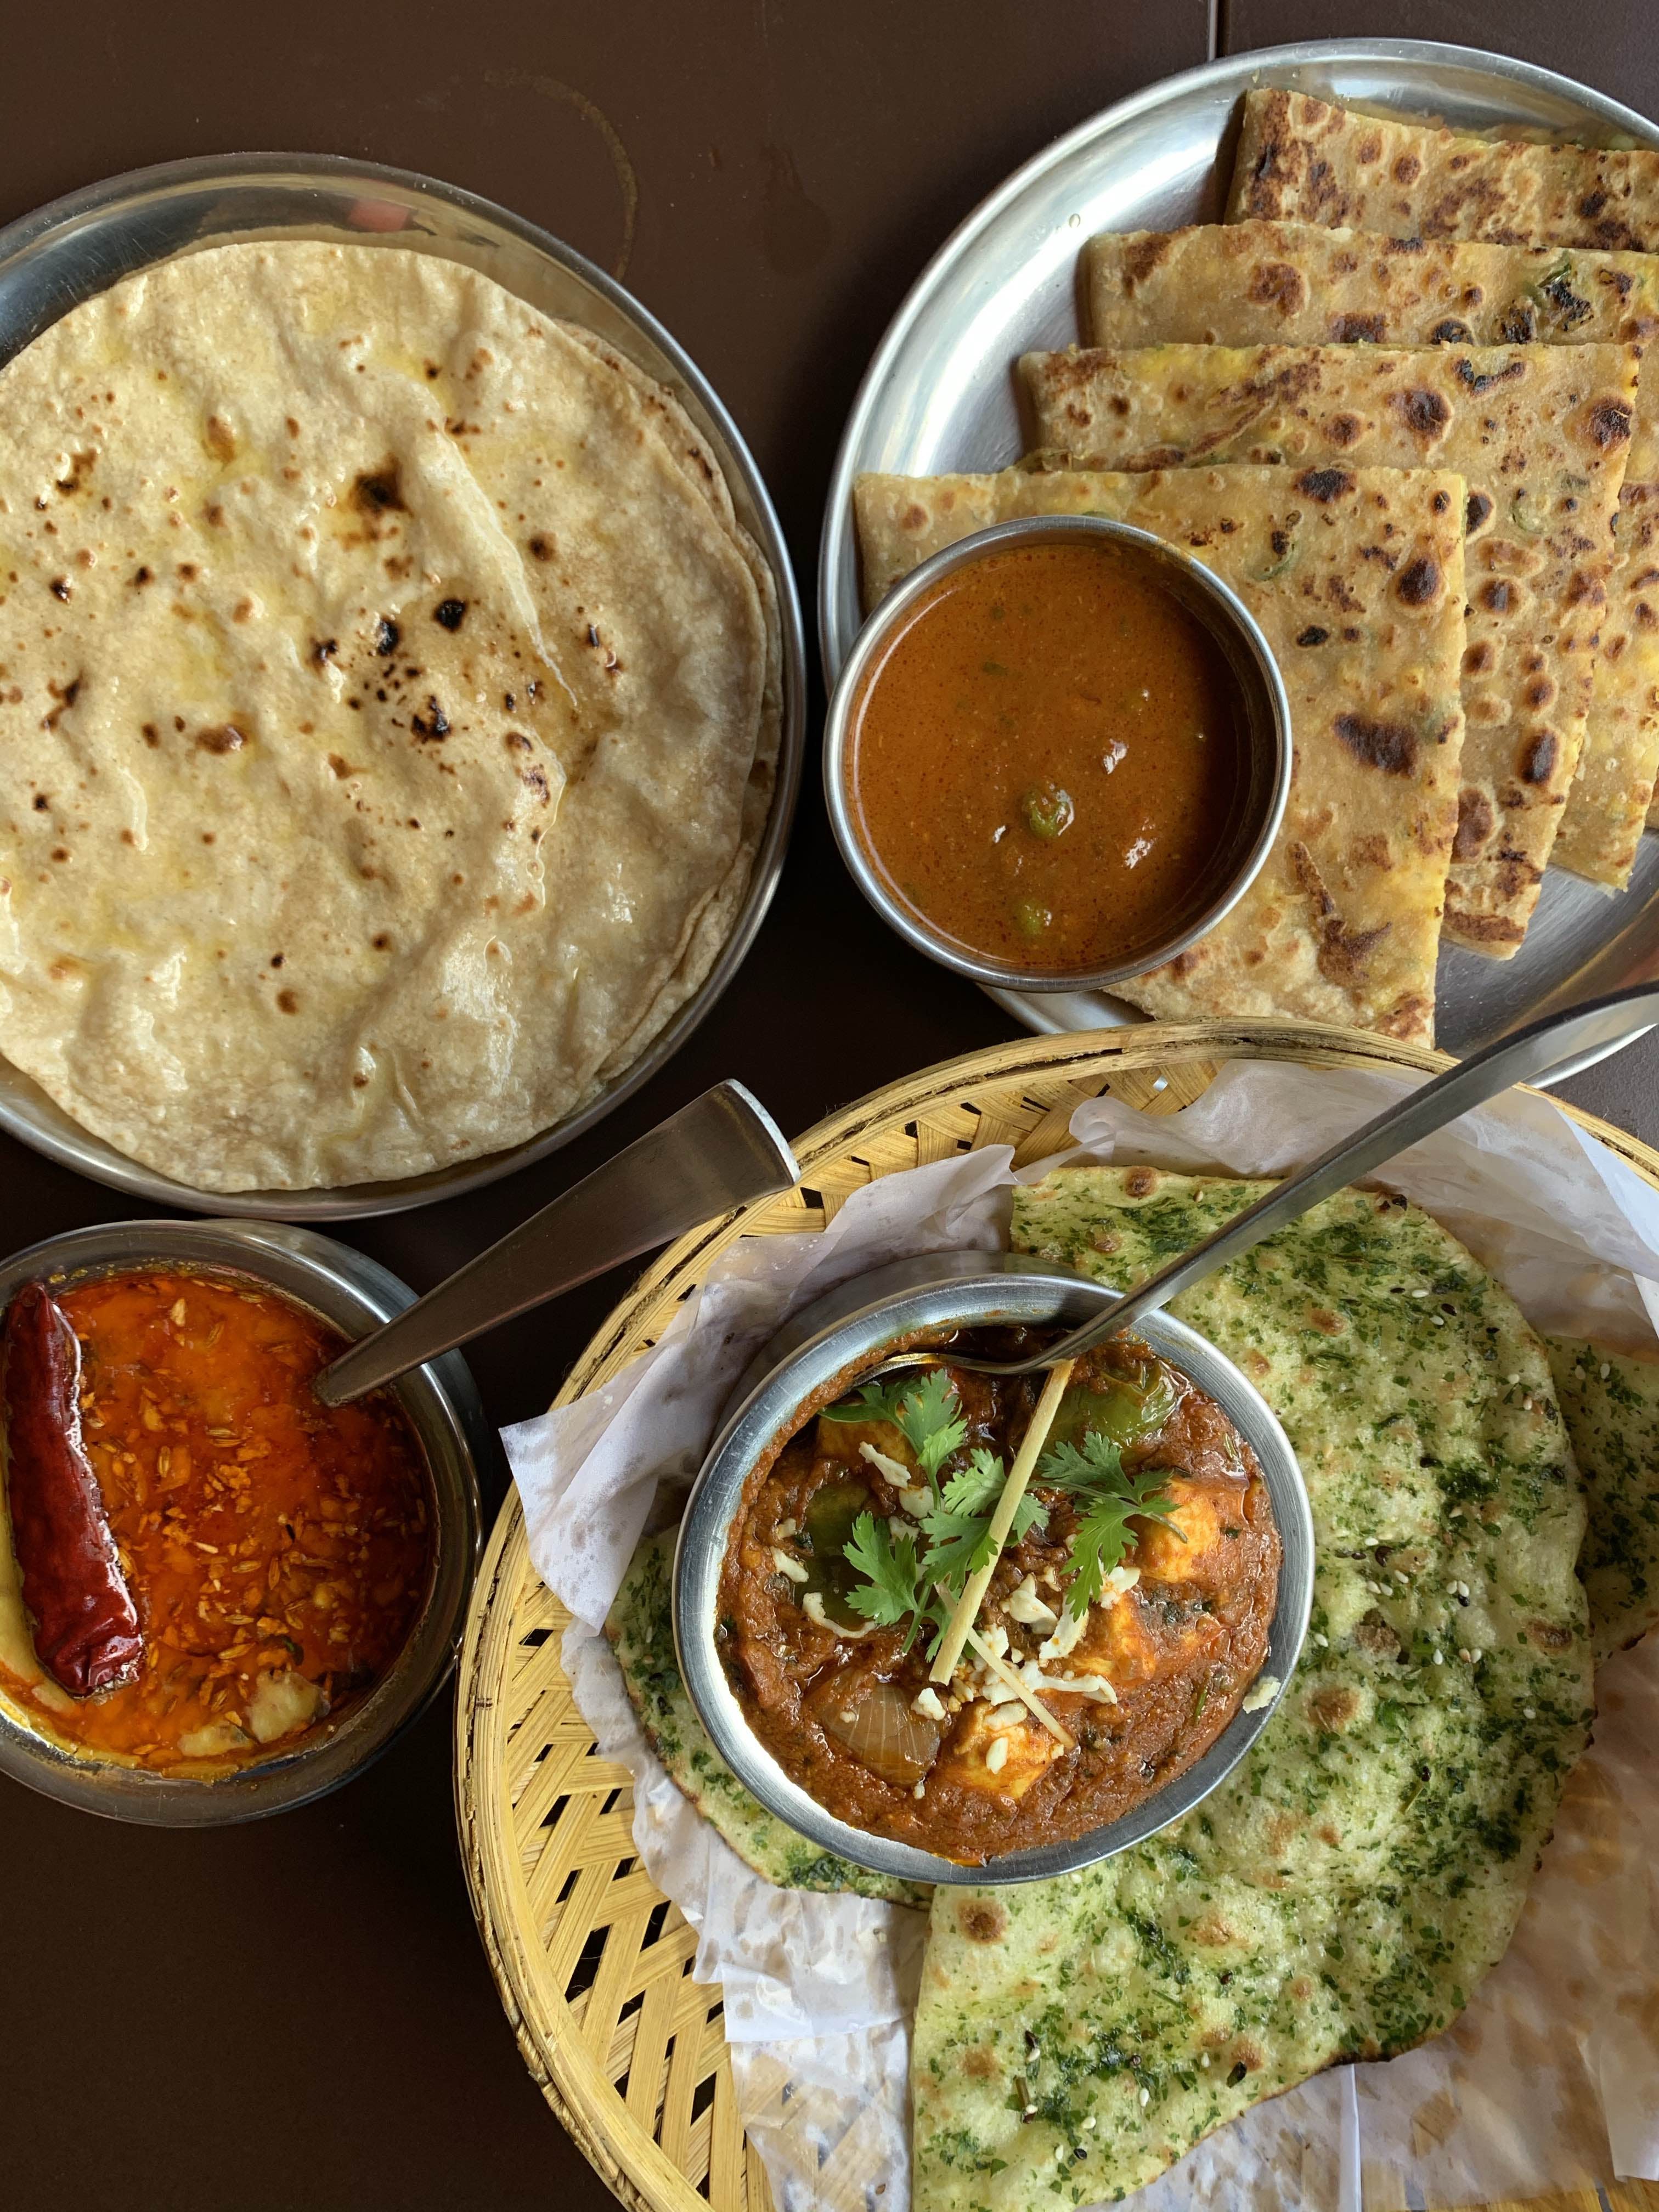 New Place Alert: This Newbie In Sarjapur Road Does Amazing North Indian Cuisine!